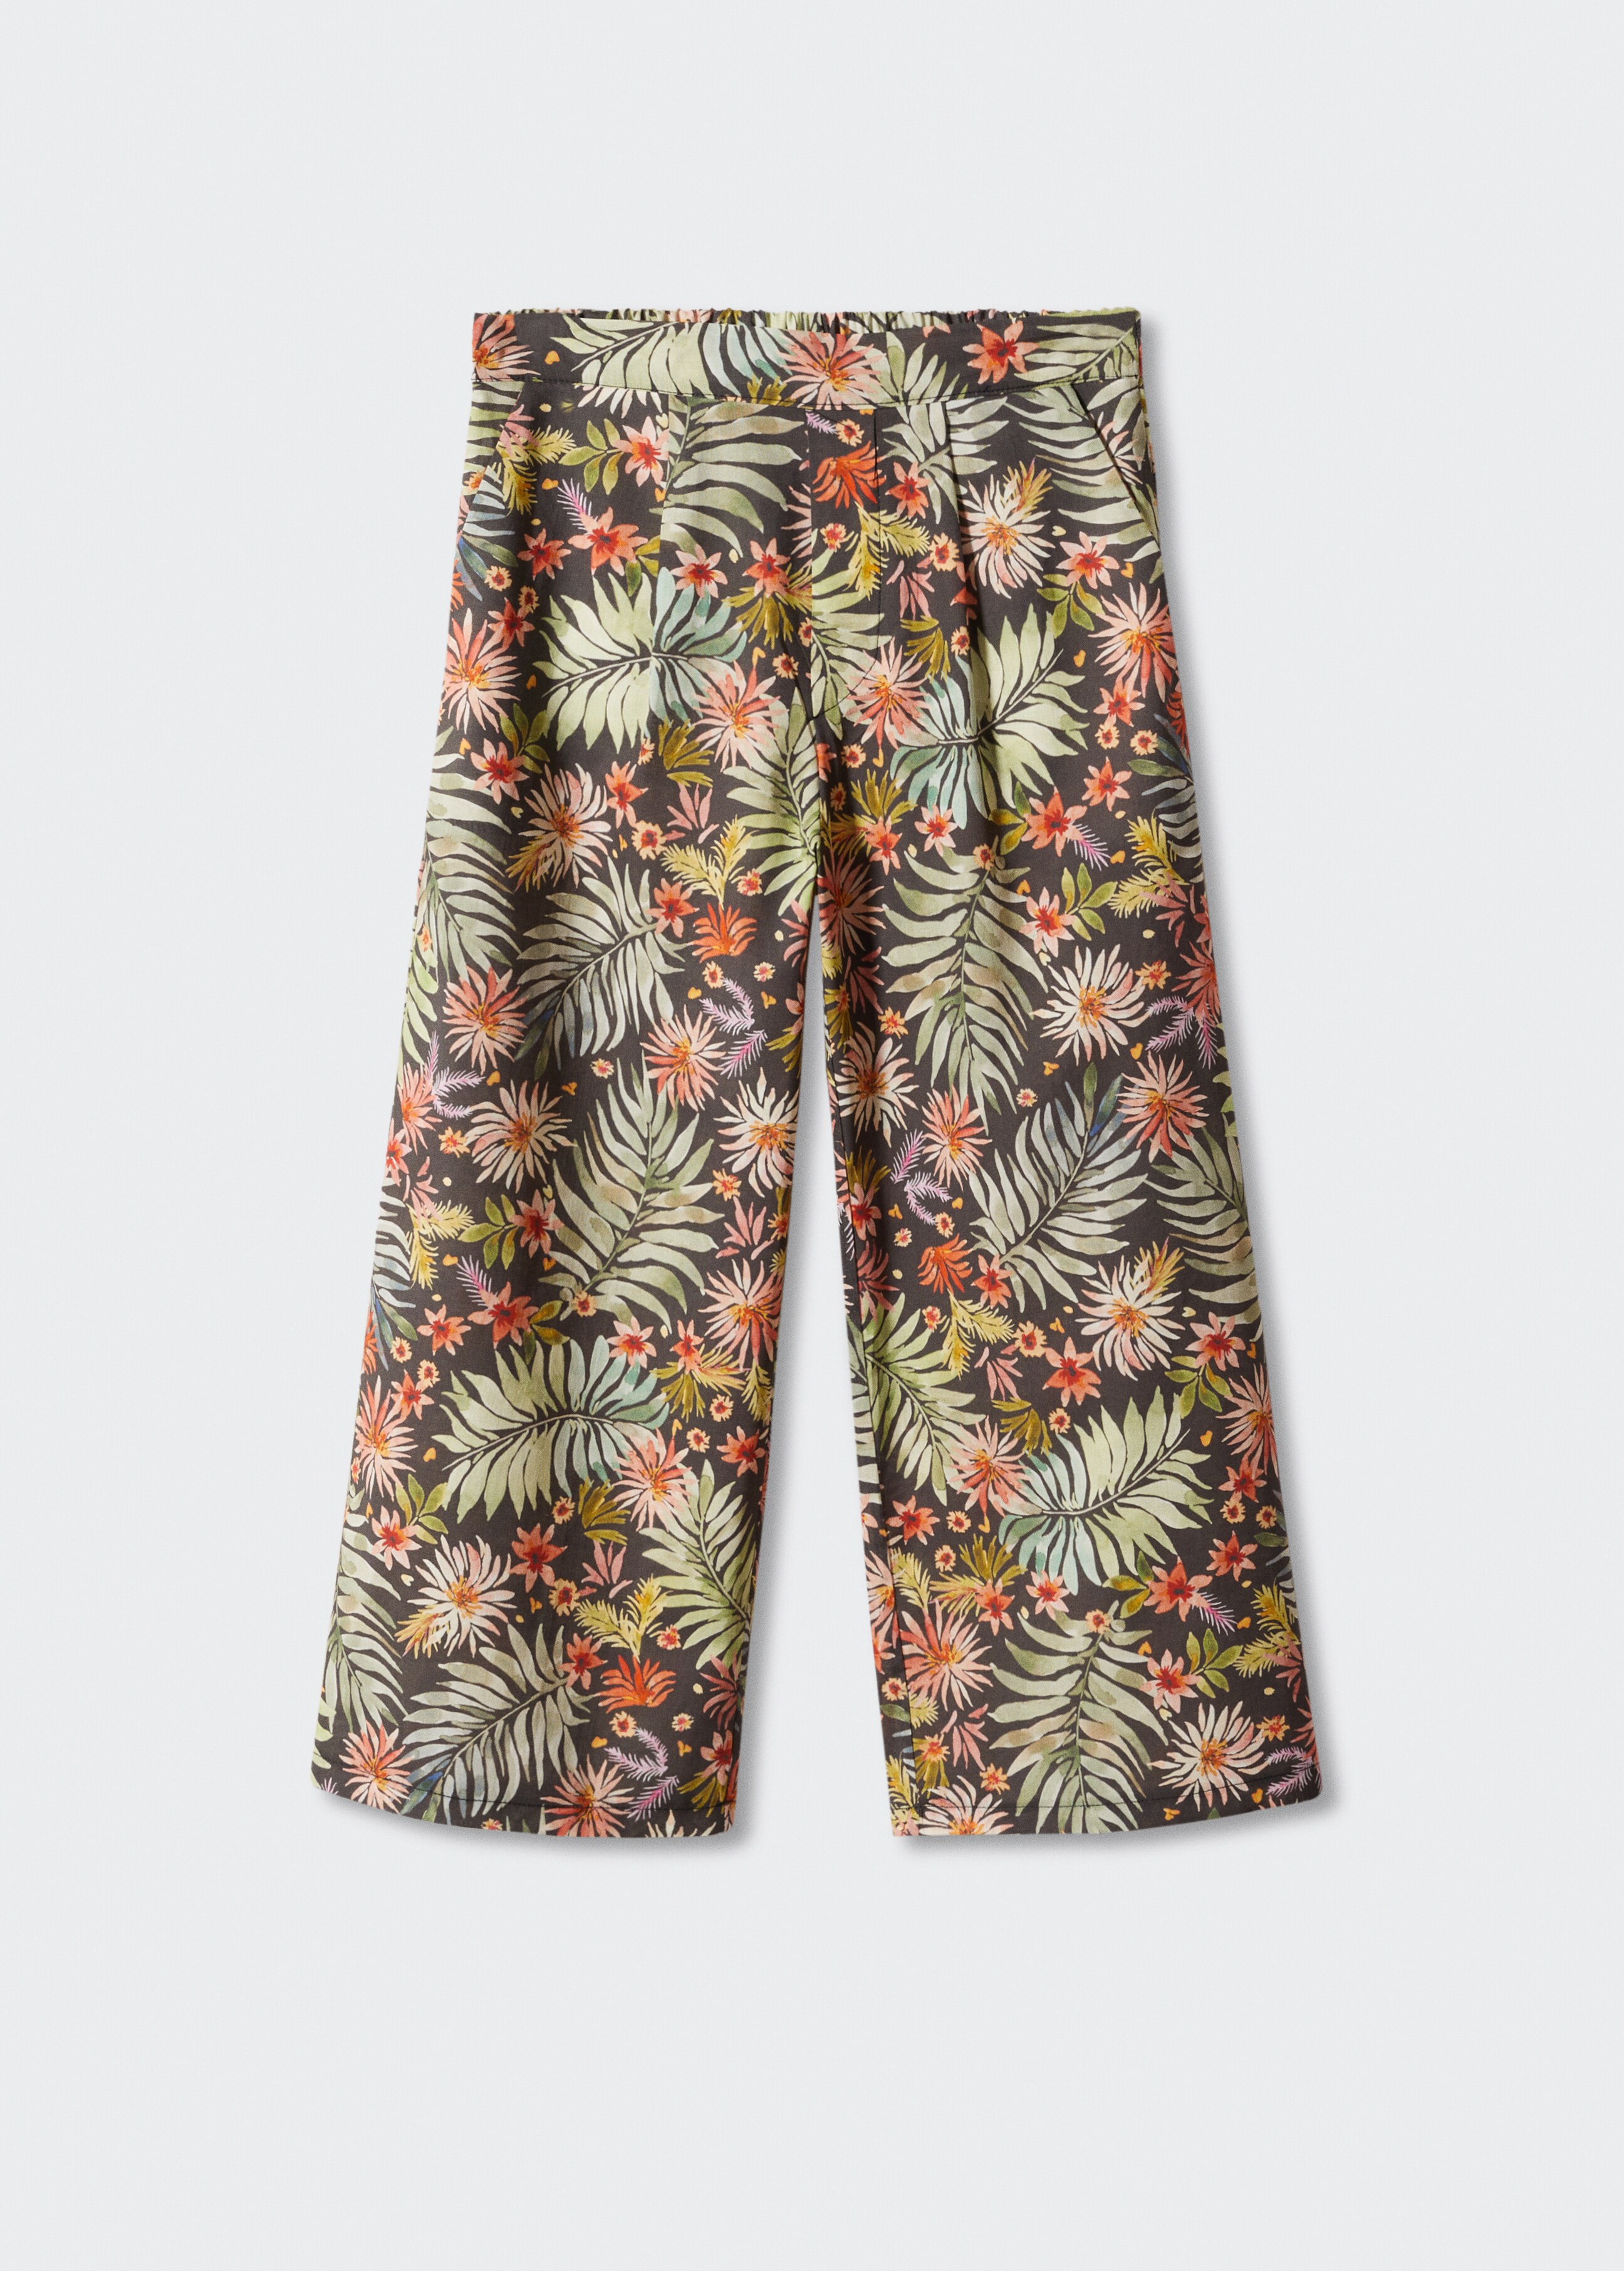 Printed trousers - Article without model